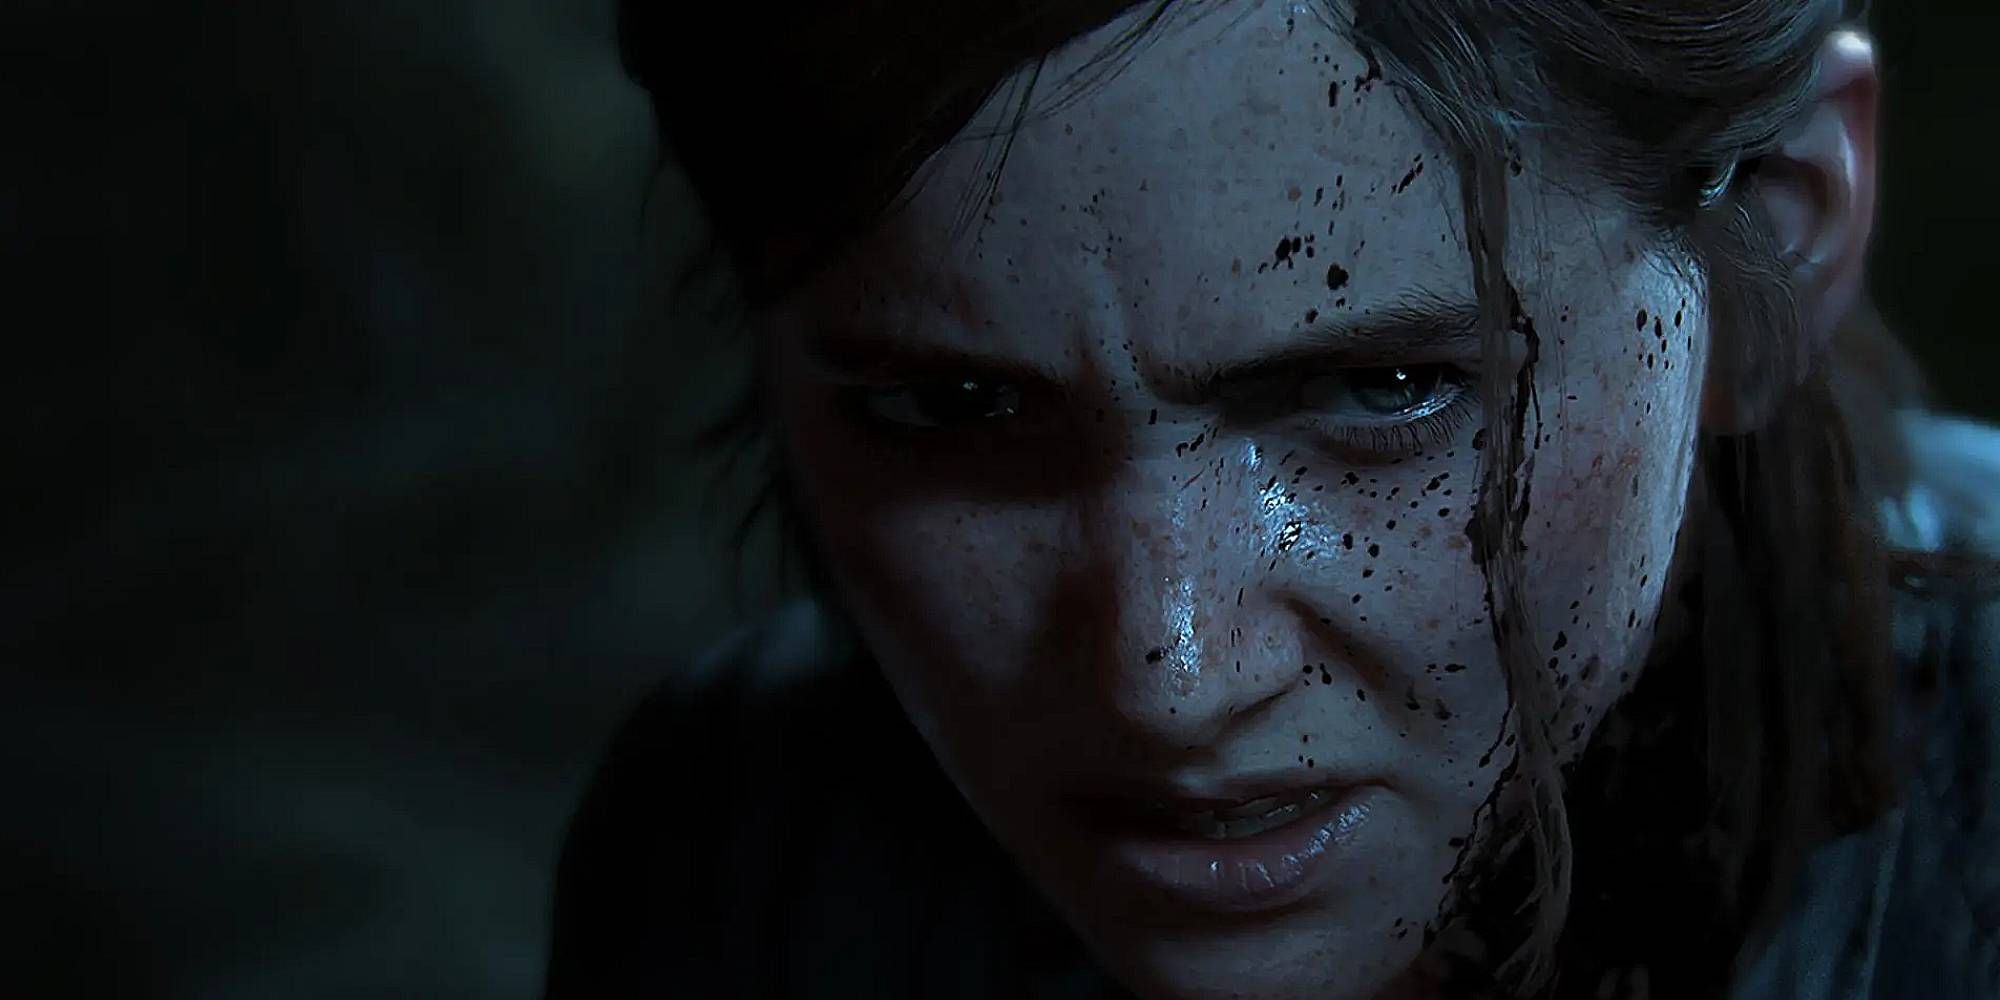 Ellie from The Last Of Us looks up angrily whilst covered in grime